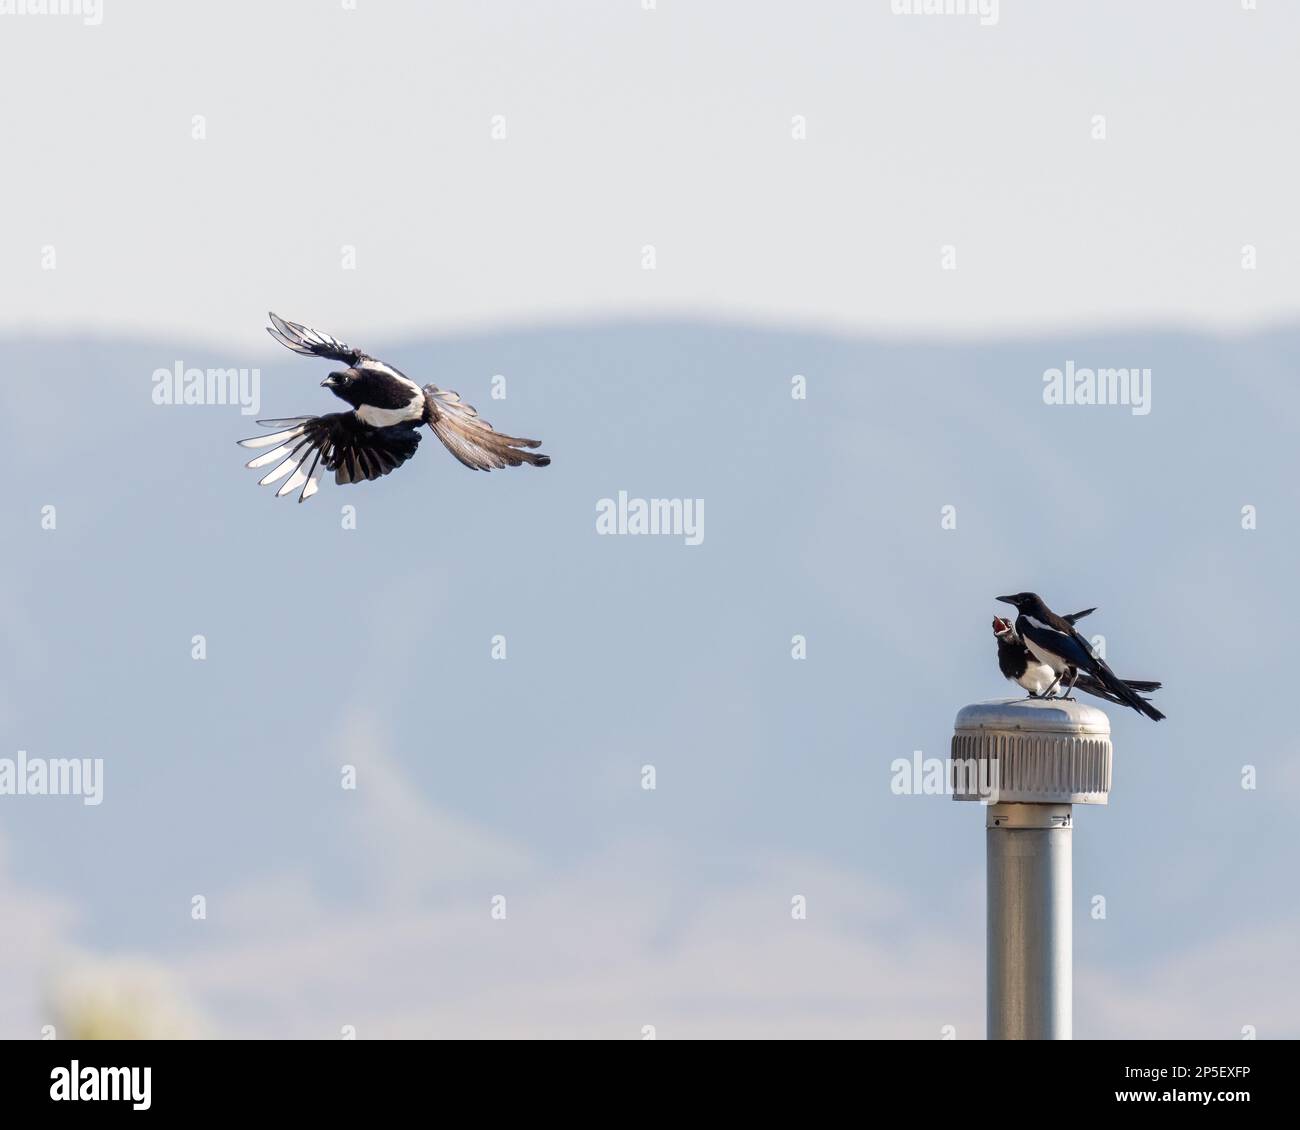 Black Billed Magpies flying and fighting above a neighbor's roof. Stock Photo